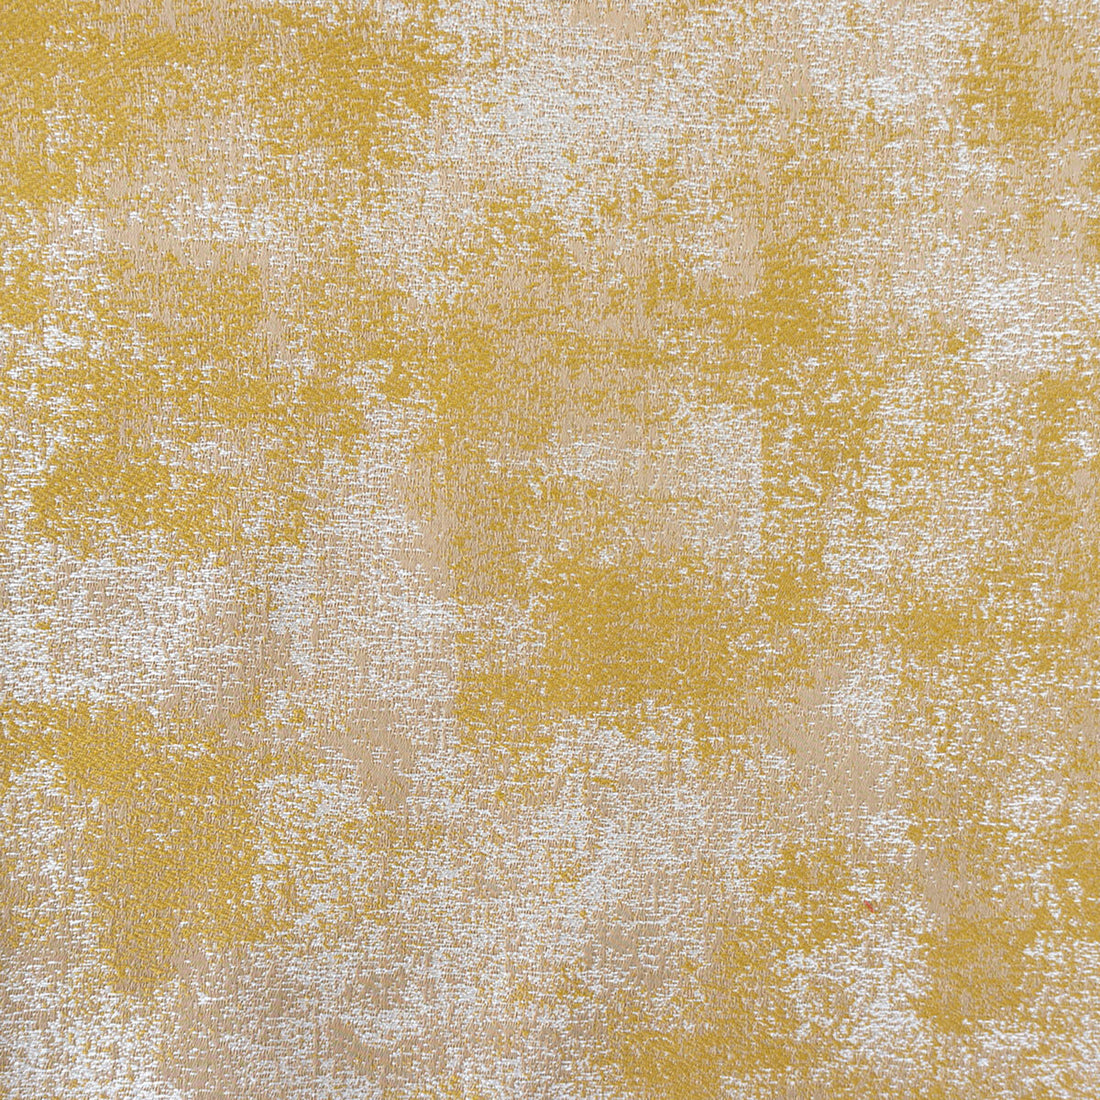 Ka fabric in oro color - pattern GDT5642.002.0 - by Gaston y Daniela in the Gaston Japon collection